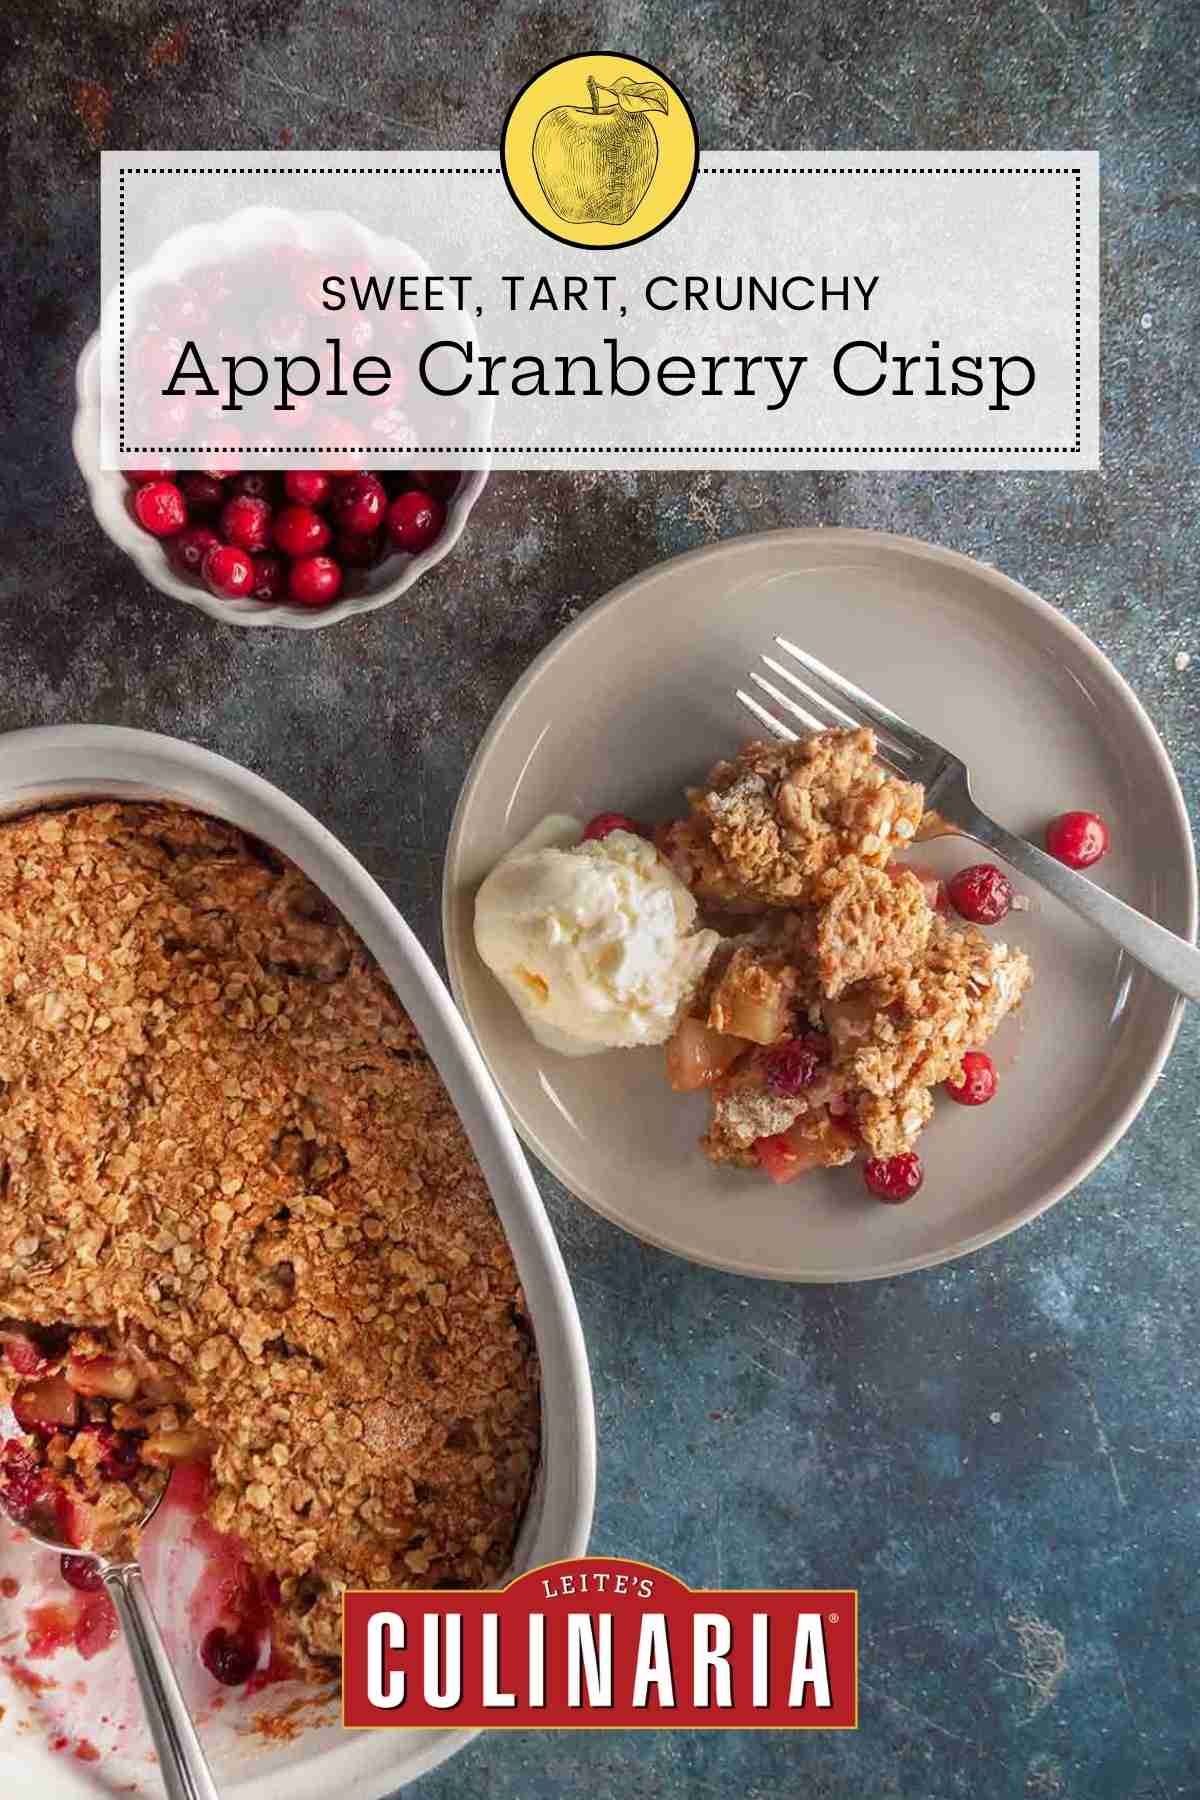 A plate with a serving of apple cranberry crisp, a scoop of vanilla ice cram, and a fork on the side.